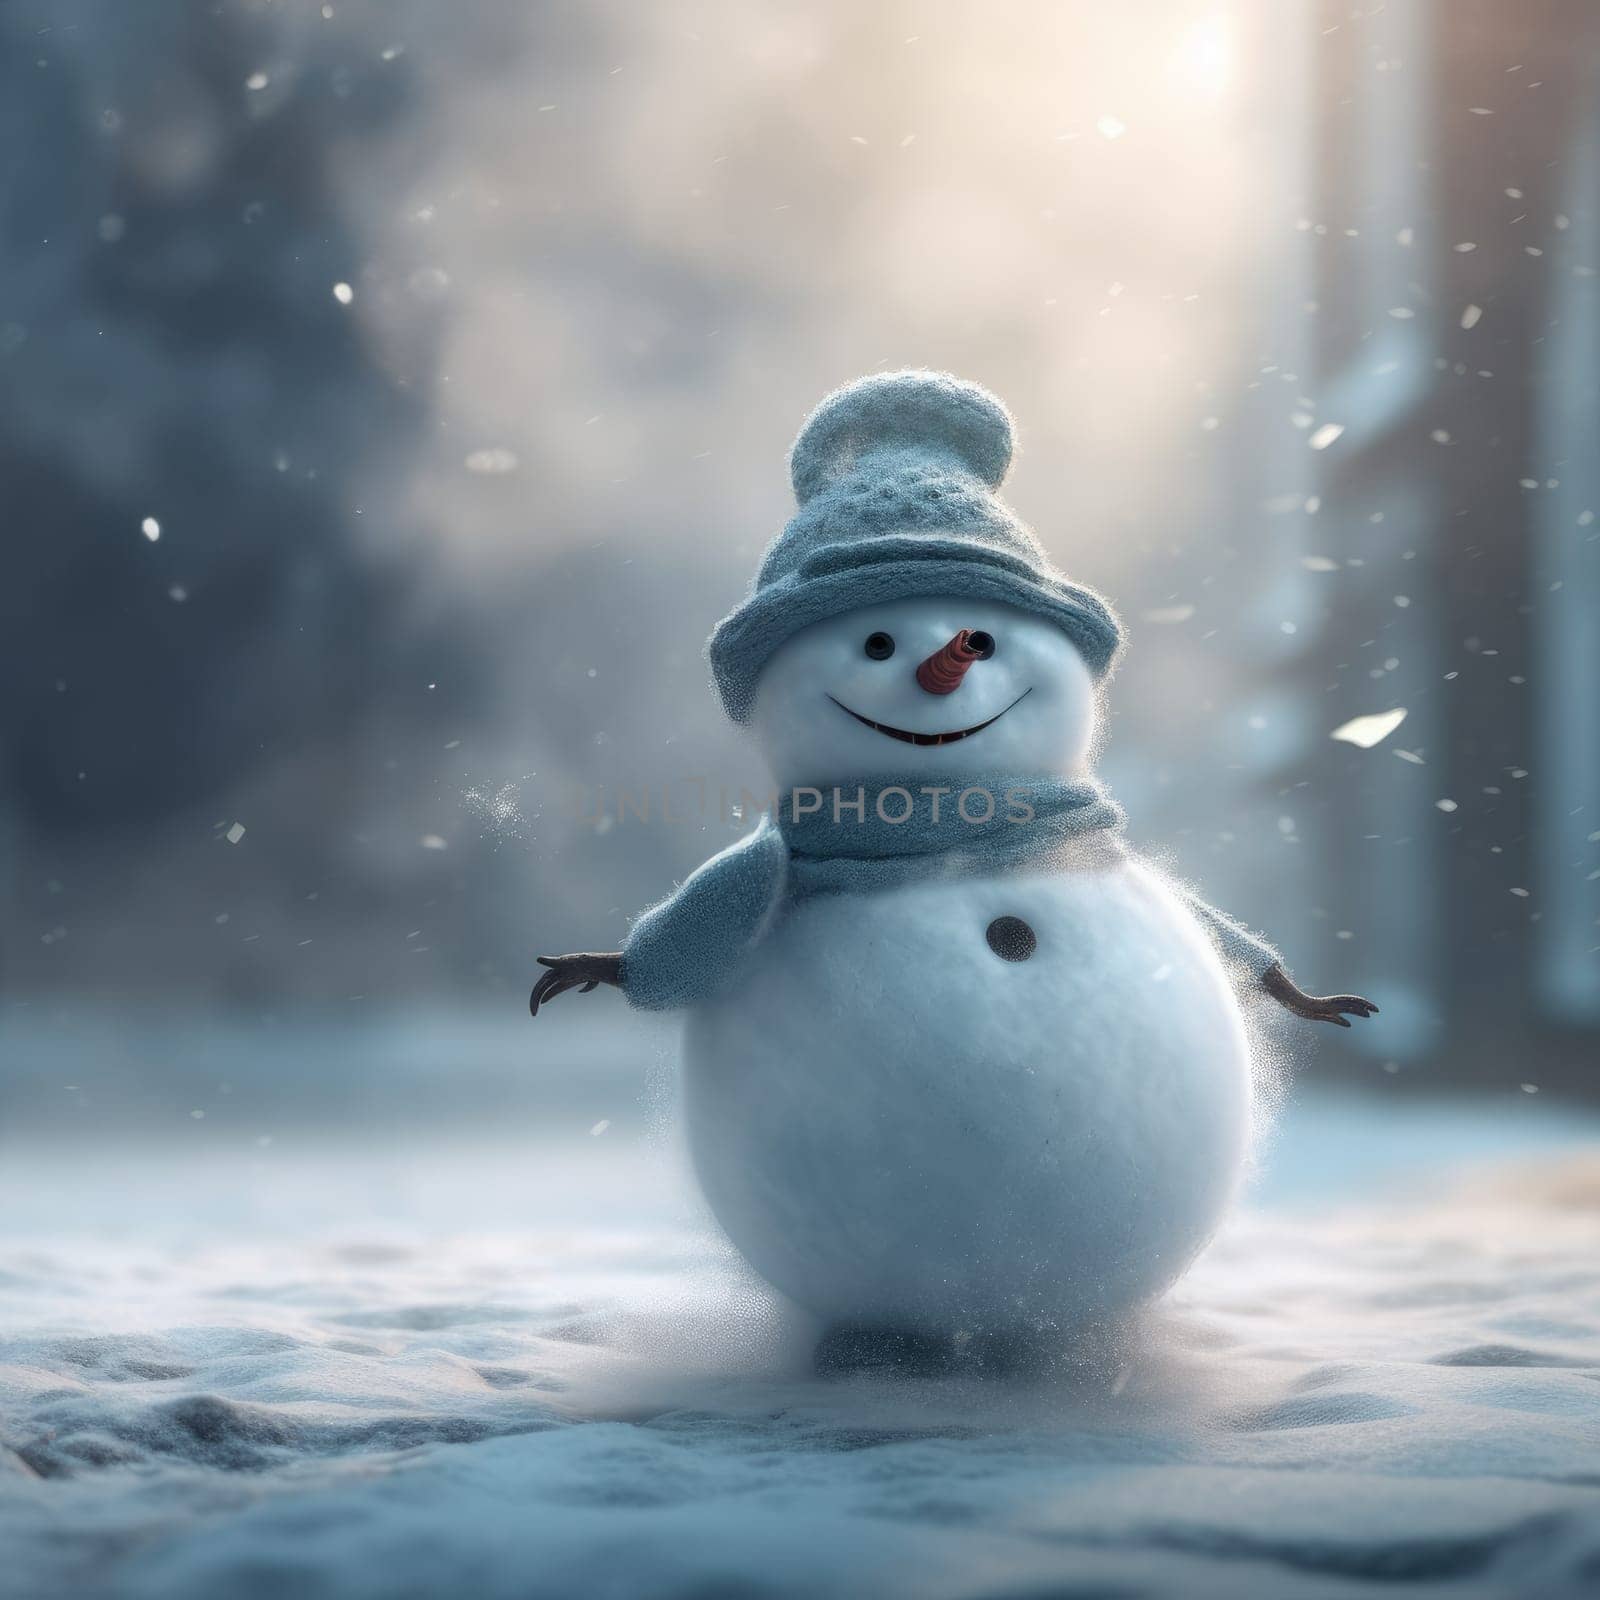 Small snowman on the background of a winter landscape